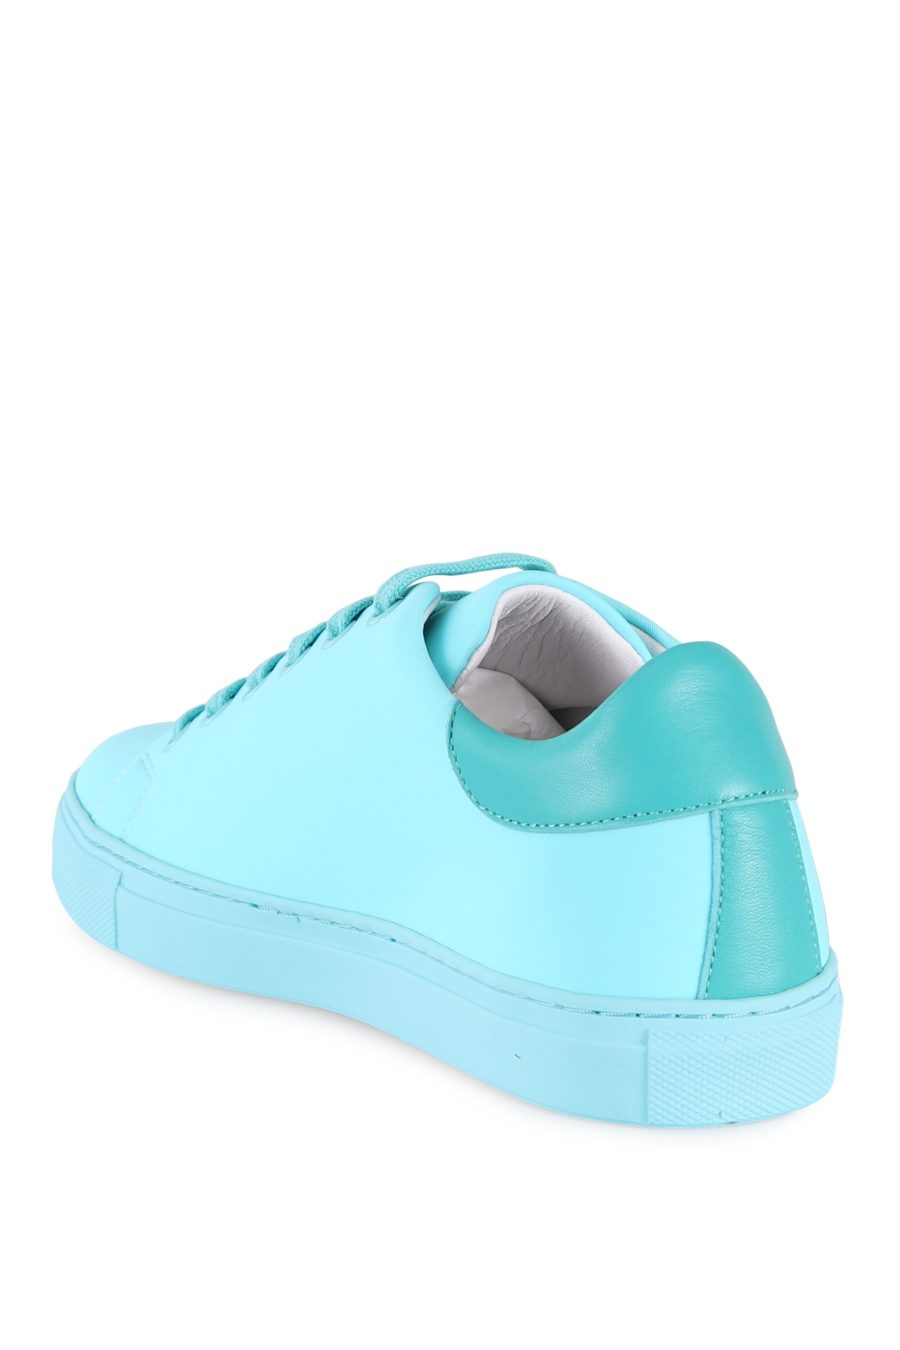 Trainers Moschino Couture in turquoise - db04d1789129604a5dae7da301f87af6e36f1dce